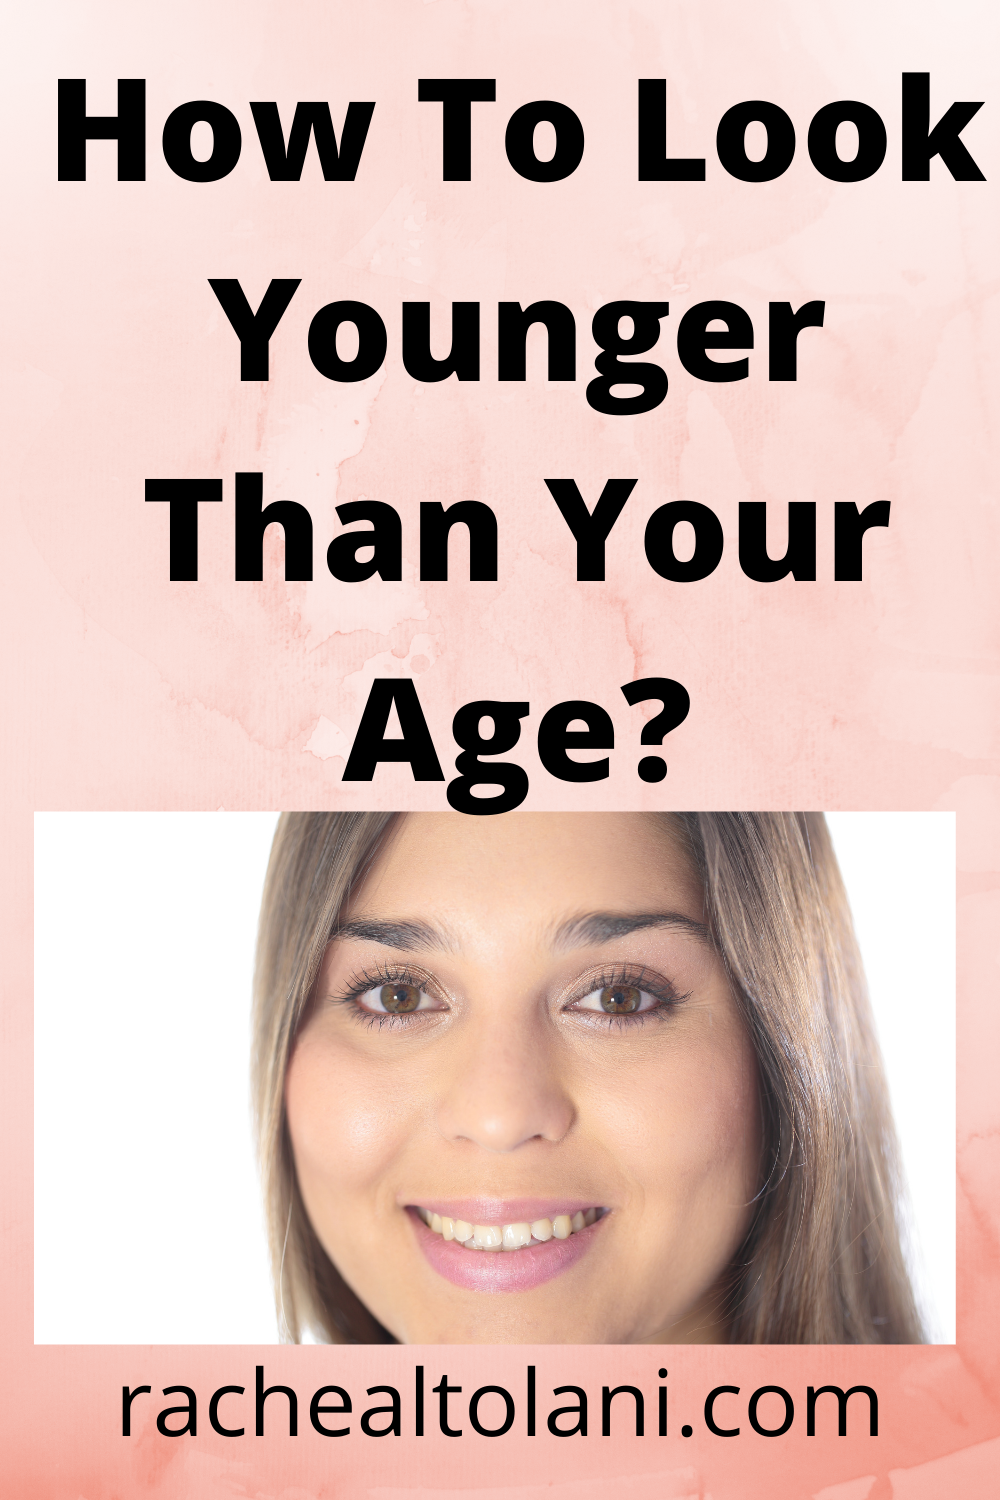 How to look younger